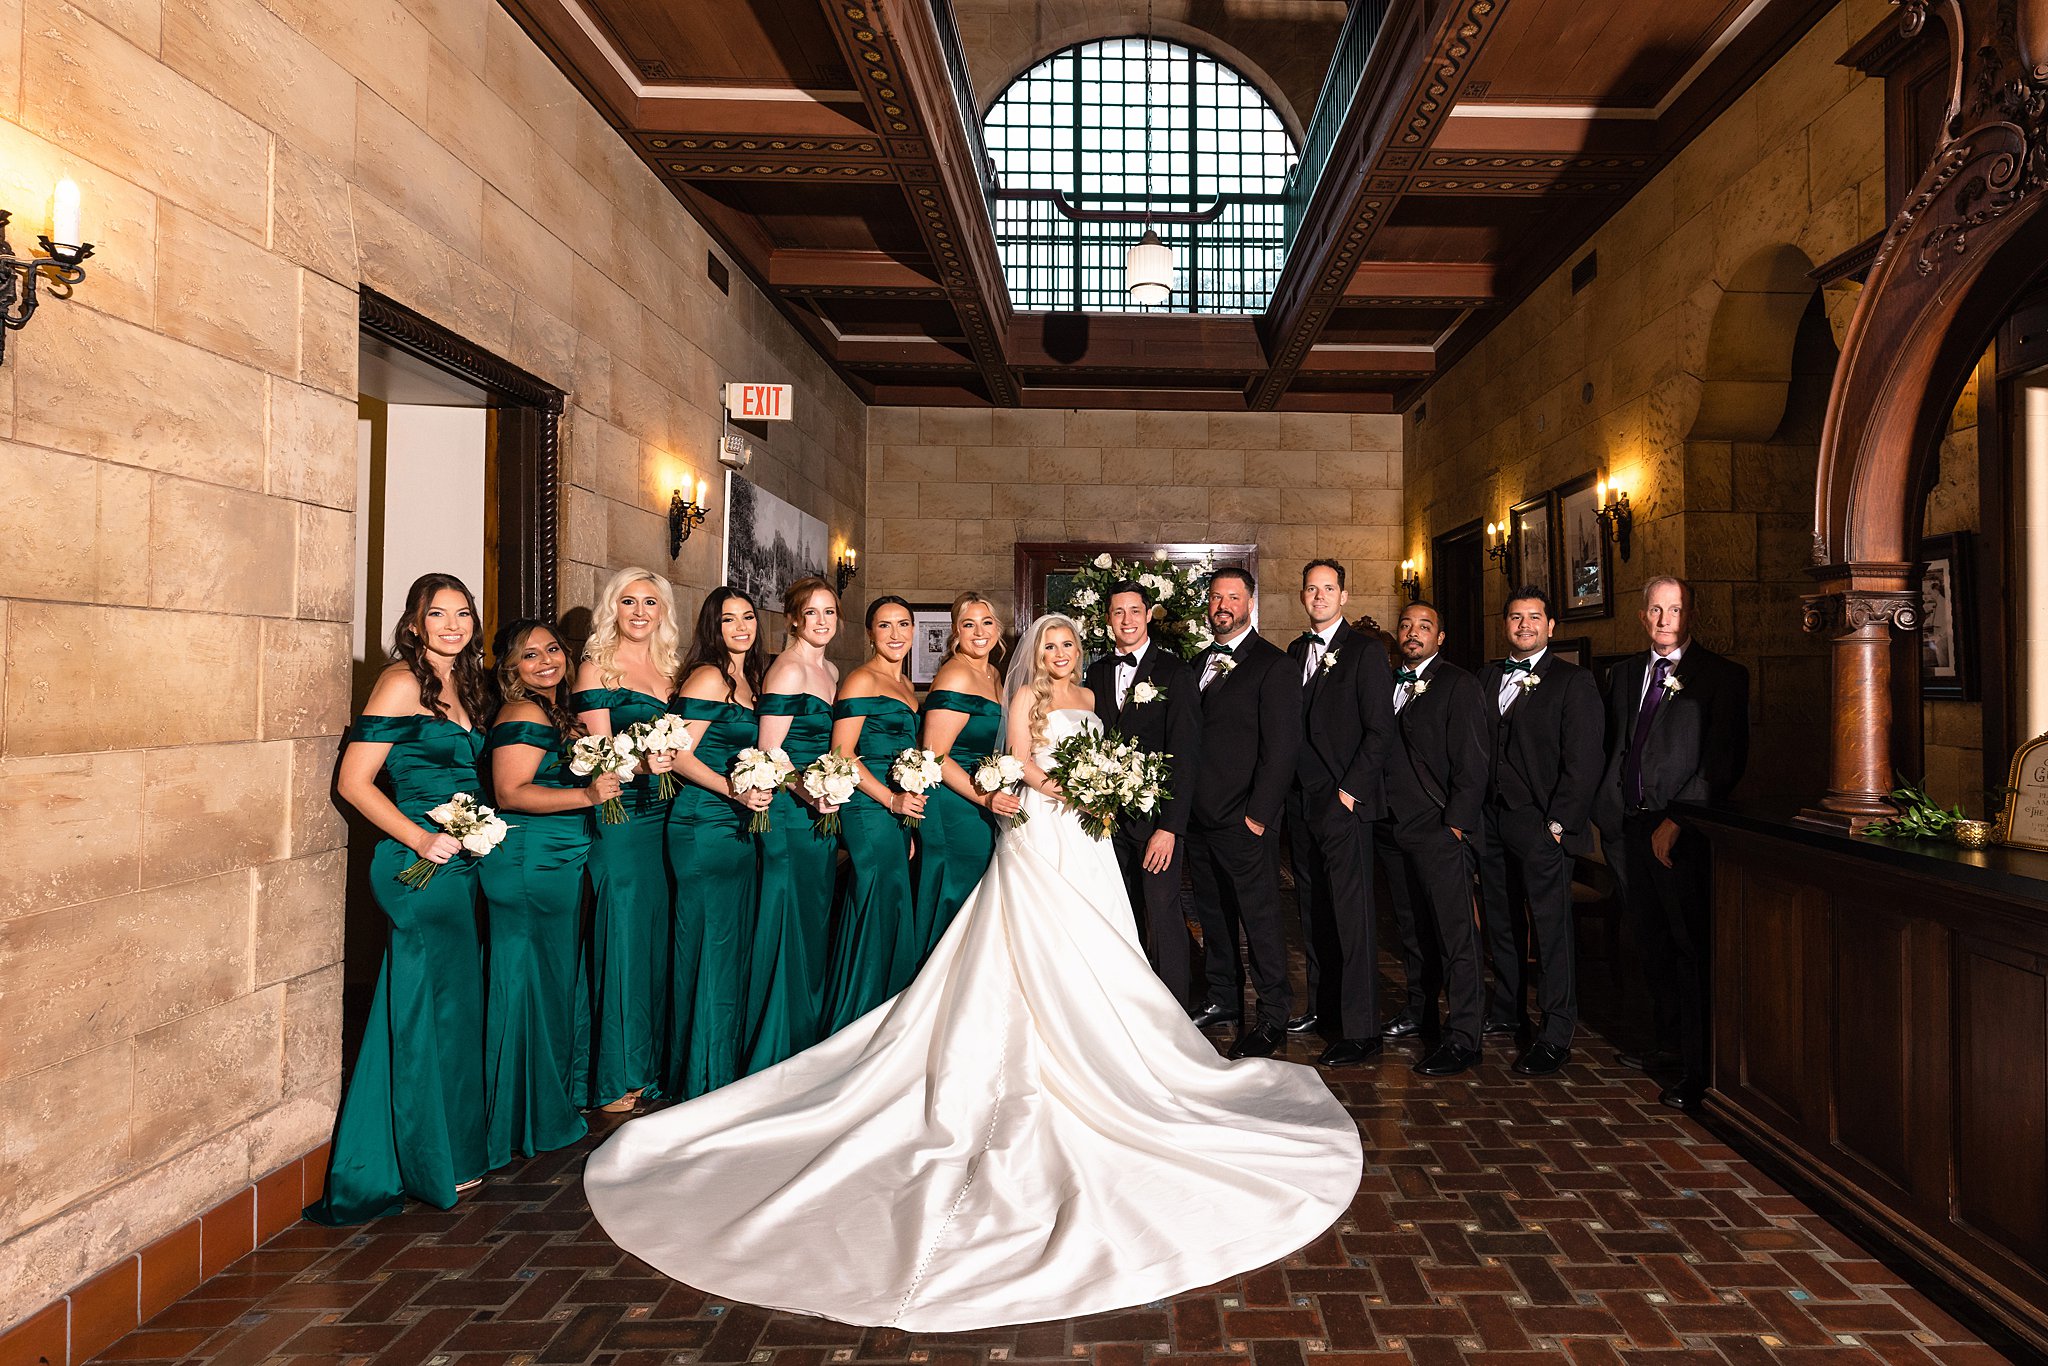 Newlyweds stand in the center of their large wedding party in an ornate lobby with the train fully laid out